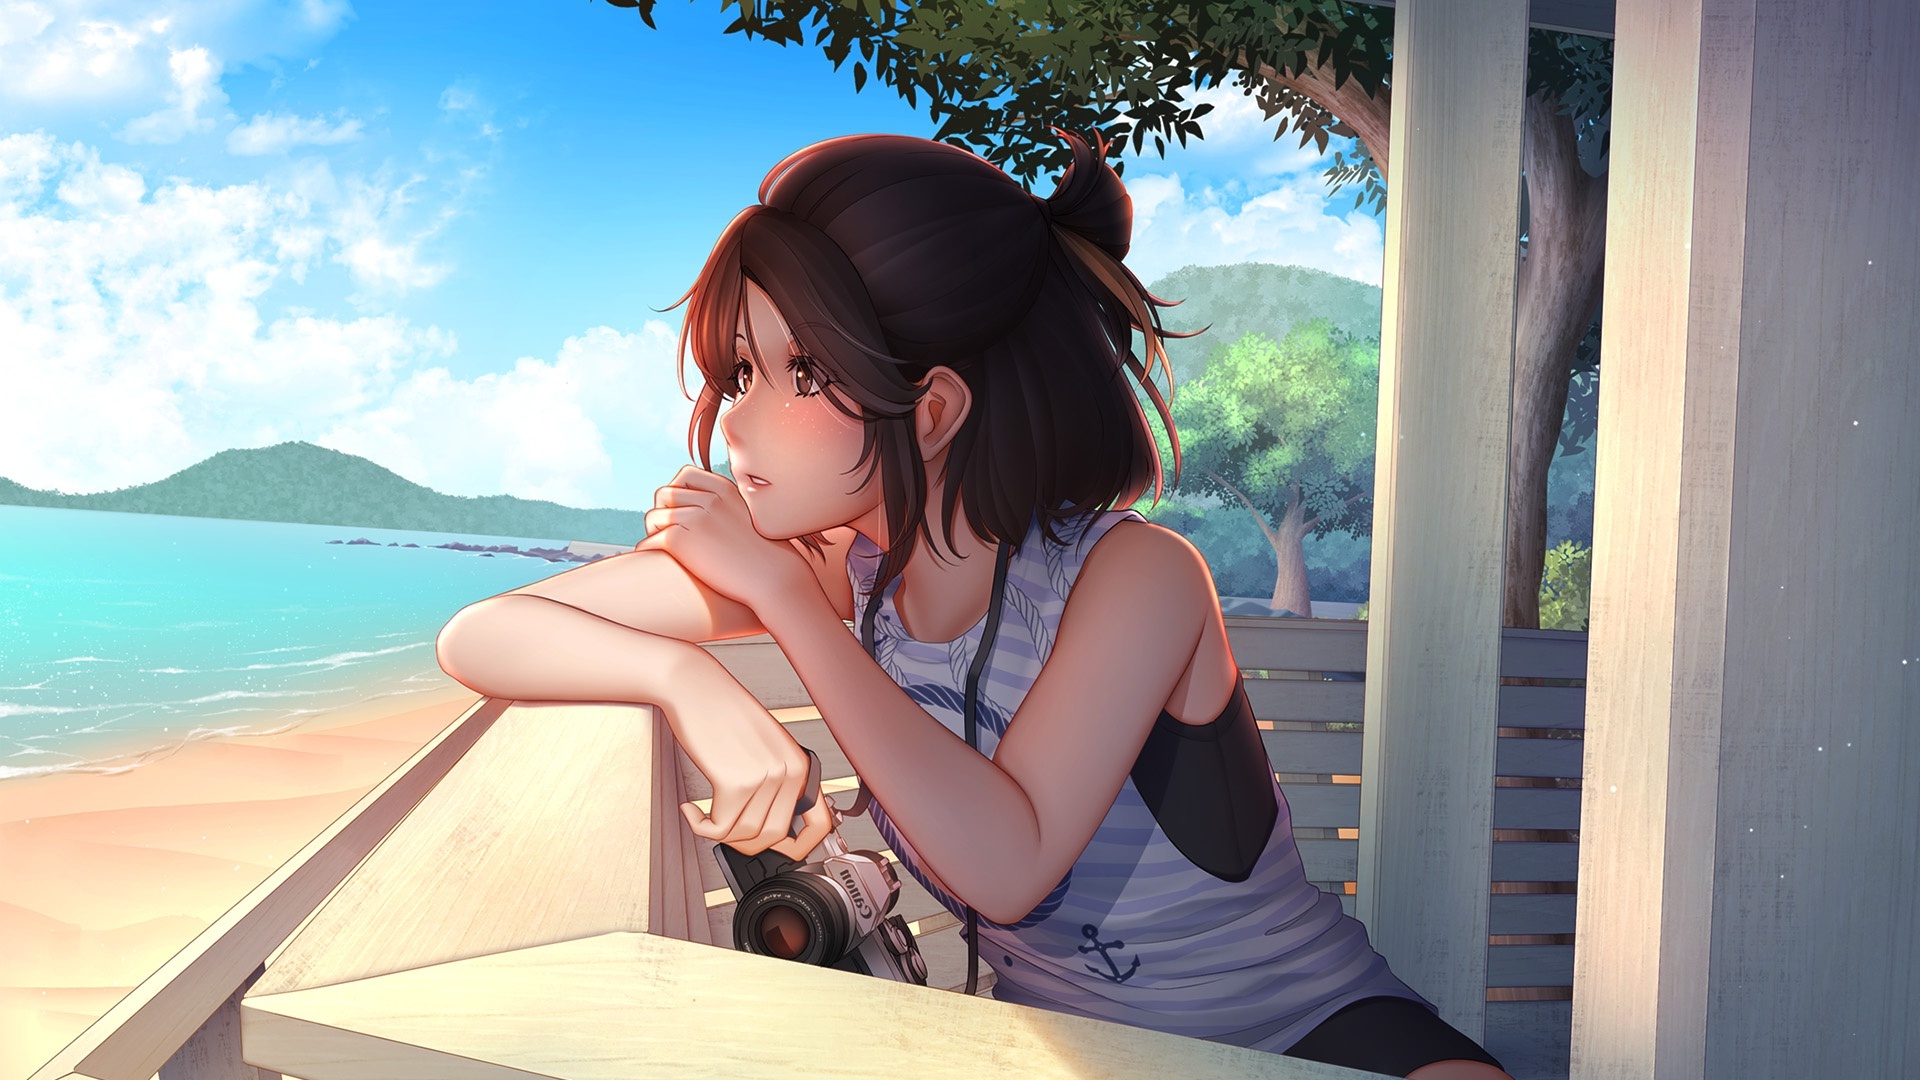 Wallpaper Looking Away, Profile View, Anime Girl, Beach, Cannon, Summer, Semi Realistic, Sky:1920x1080